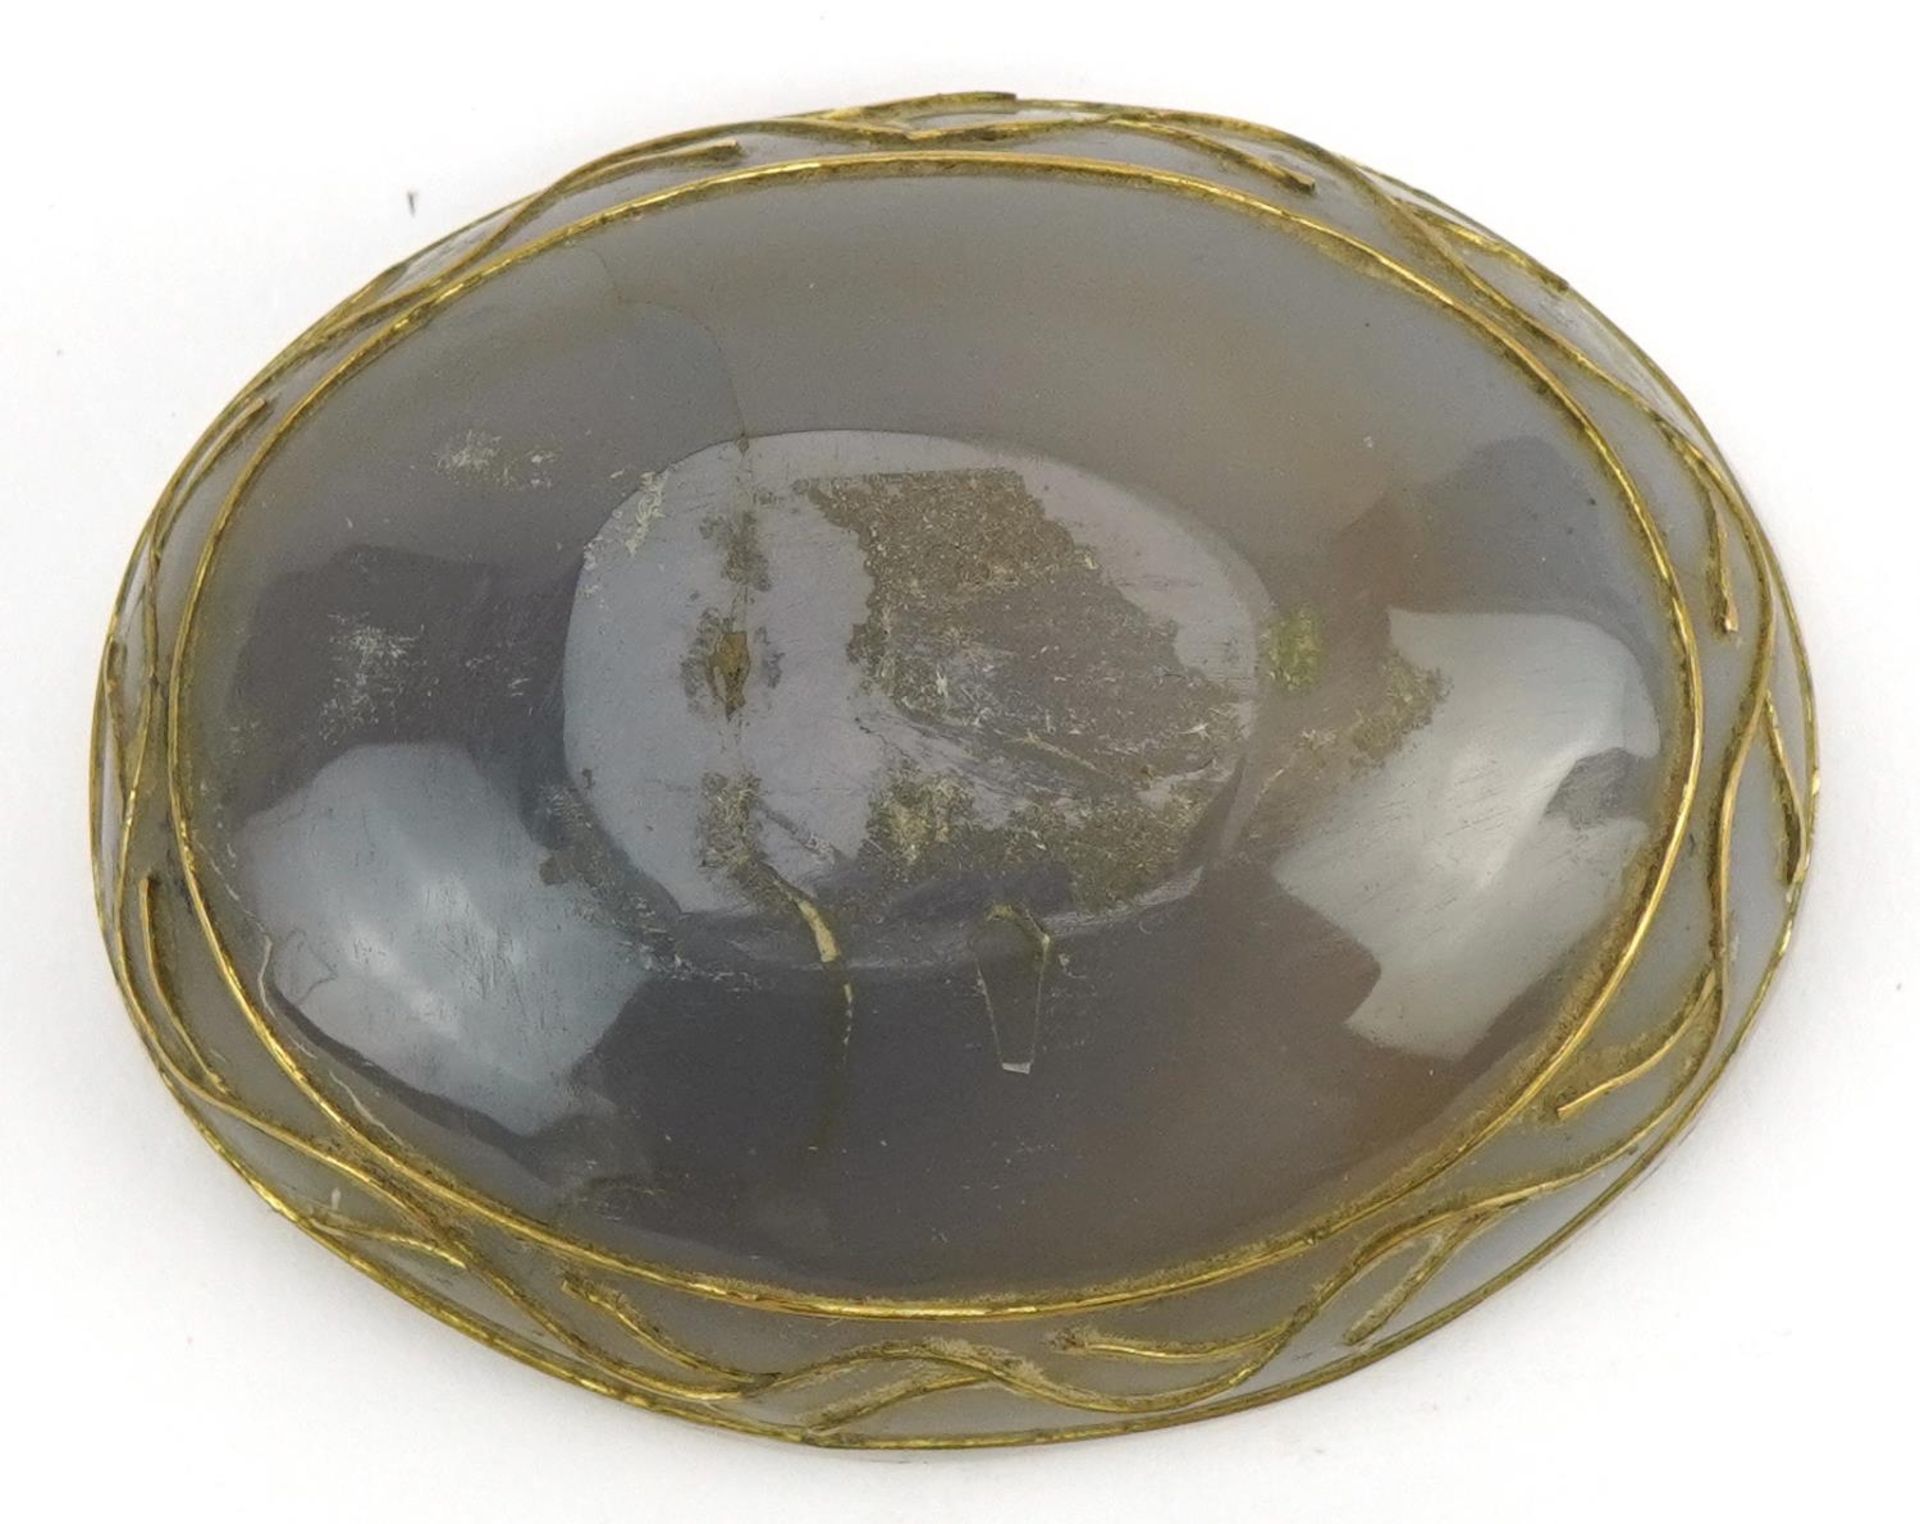 Islamic agate egg shaped box and cover inlaid with stone and metal inlay, 6cm in length - Image 4 of 4